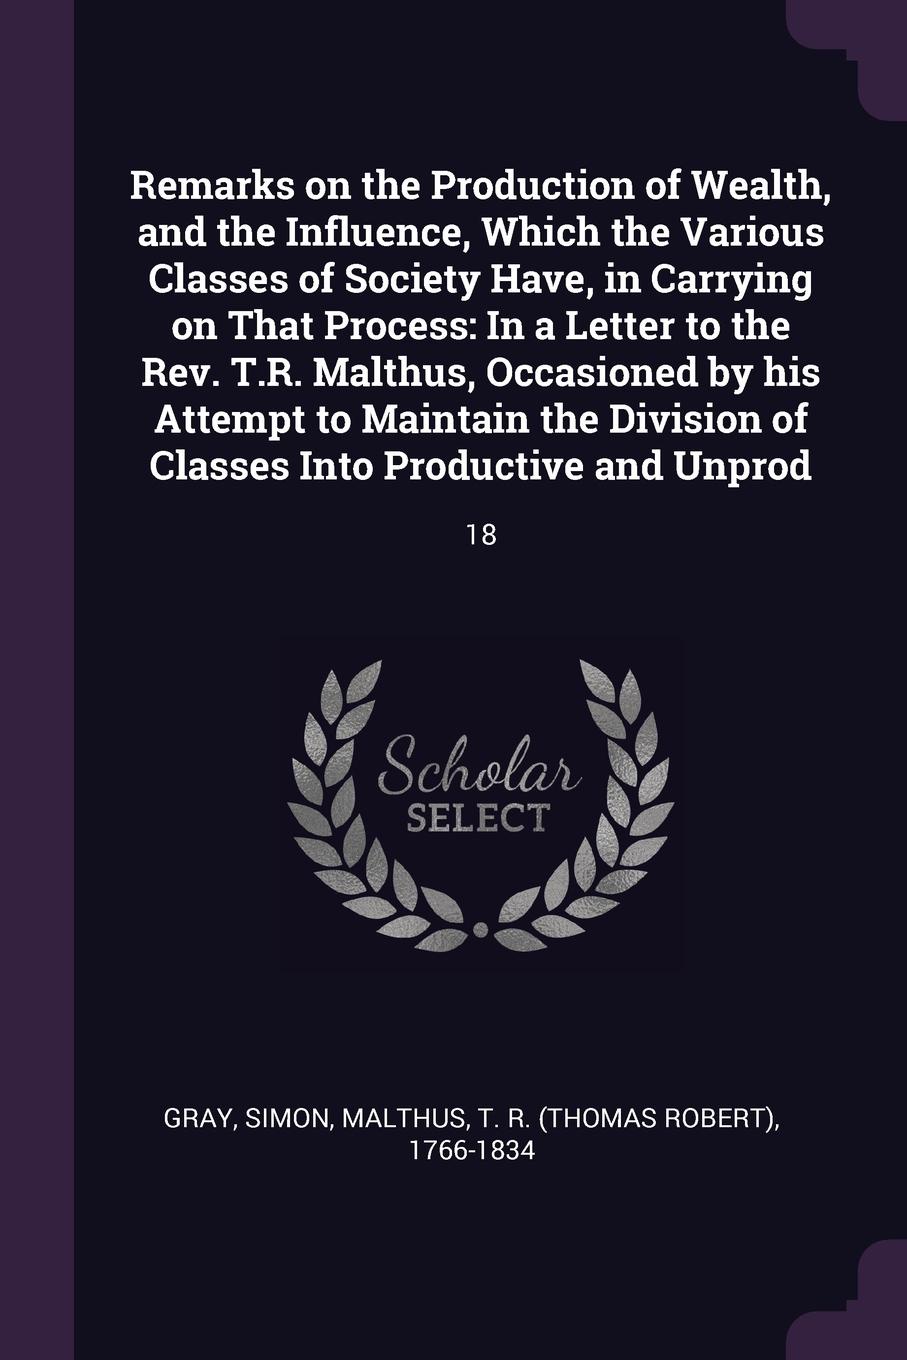 Remarks on the Production of Wealth, and the Influence, Which the Various Classes of Society Have, in Carrying on That Process. In a Letter to the Rev. T.R. Malthus, Occasioned by his Attempt to Maintain the Division of Classes Into Productive and...